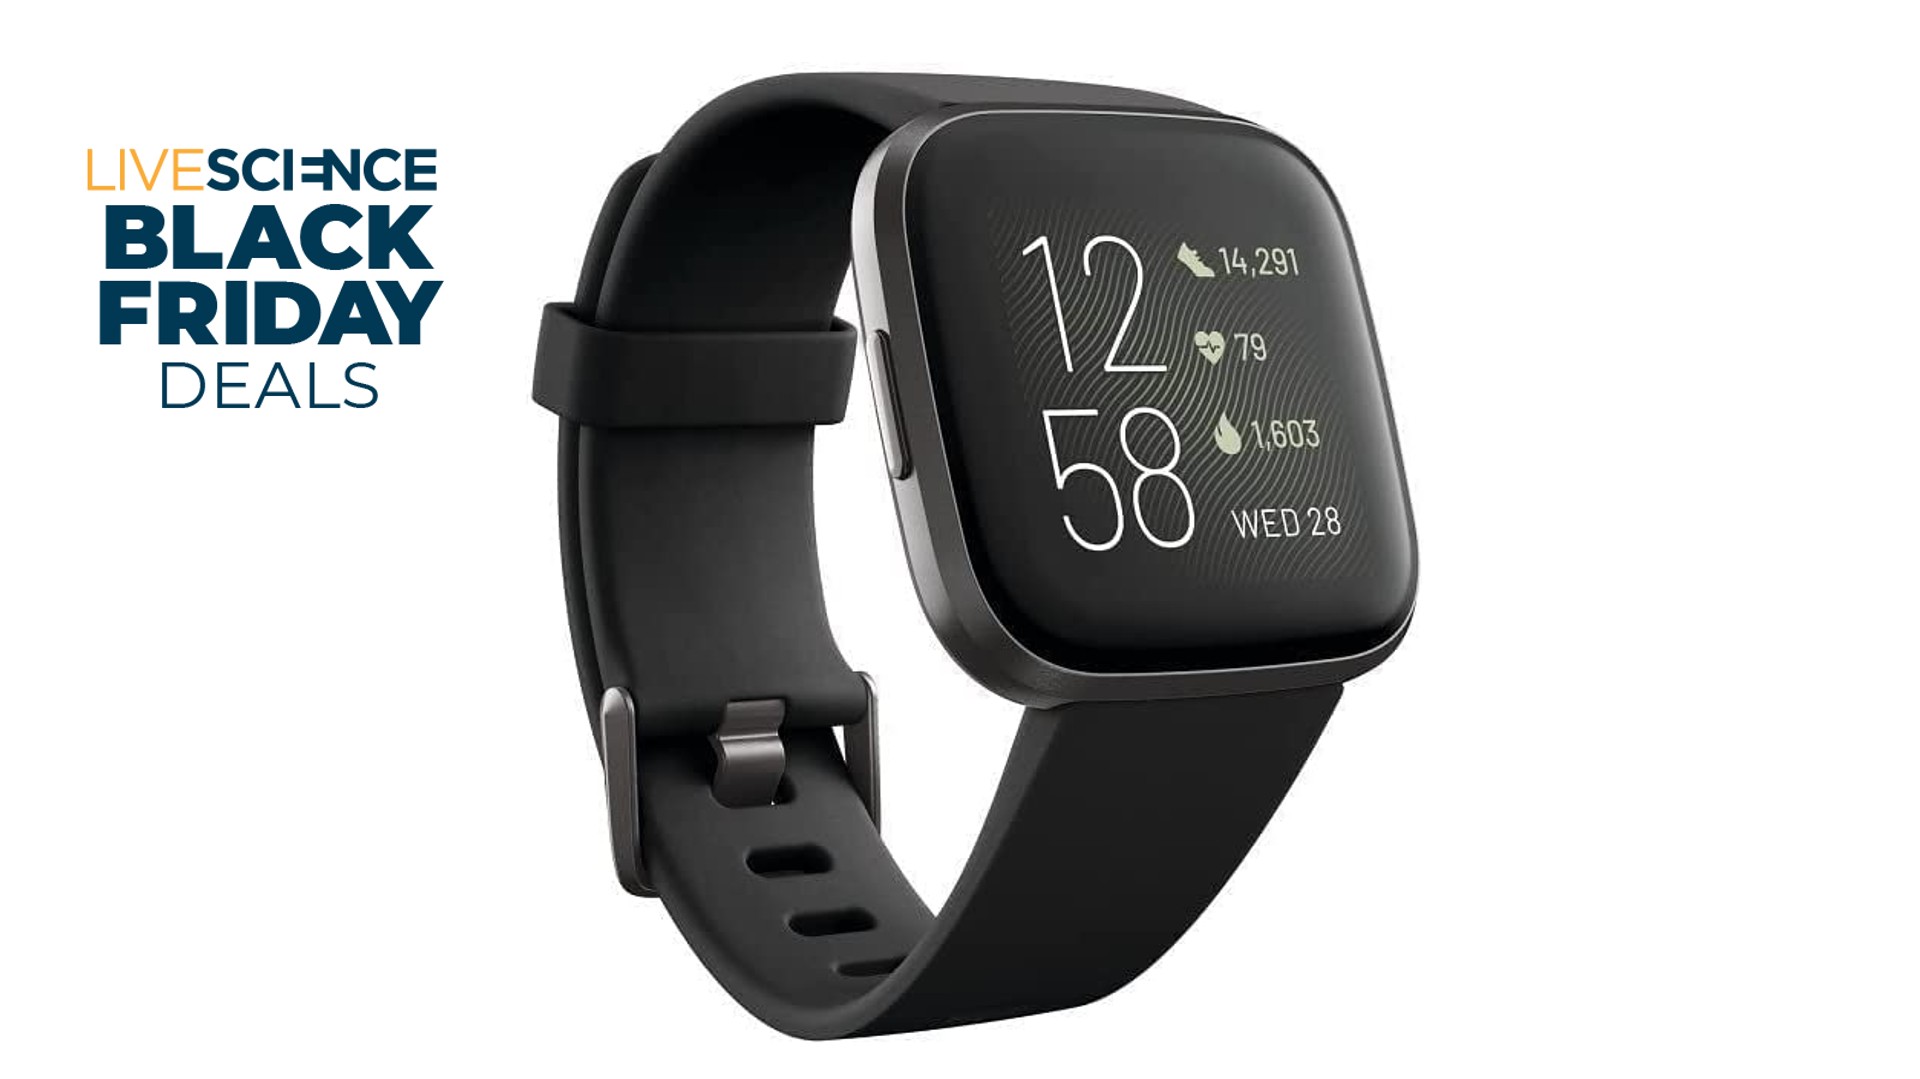 progressiv boks Sund mad The Fitbit Versa 2 has dropped to under $100 in the Black Friday sales |  Live Science